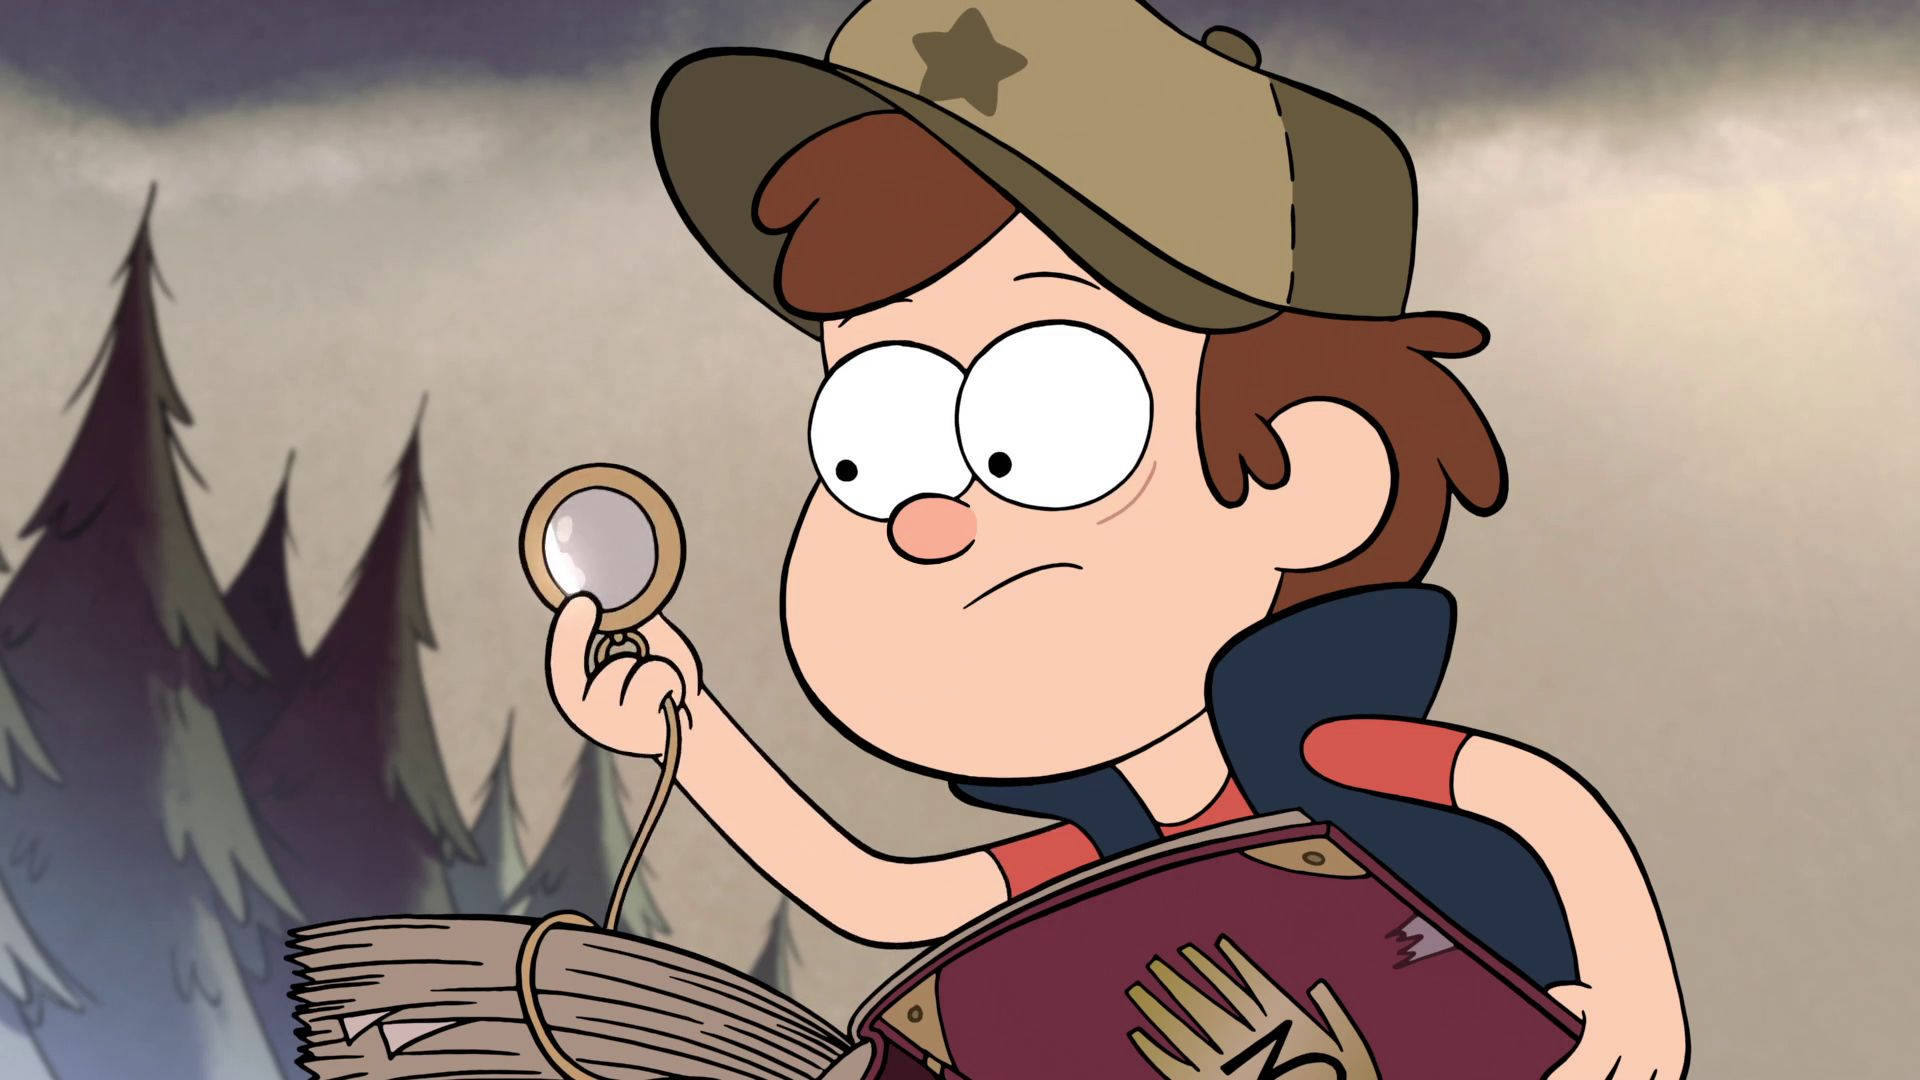 1920X1080 Gravity Falls Wallpaper and Background